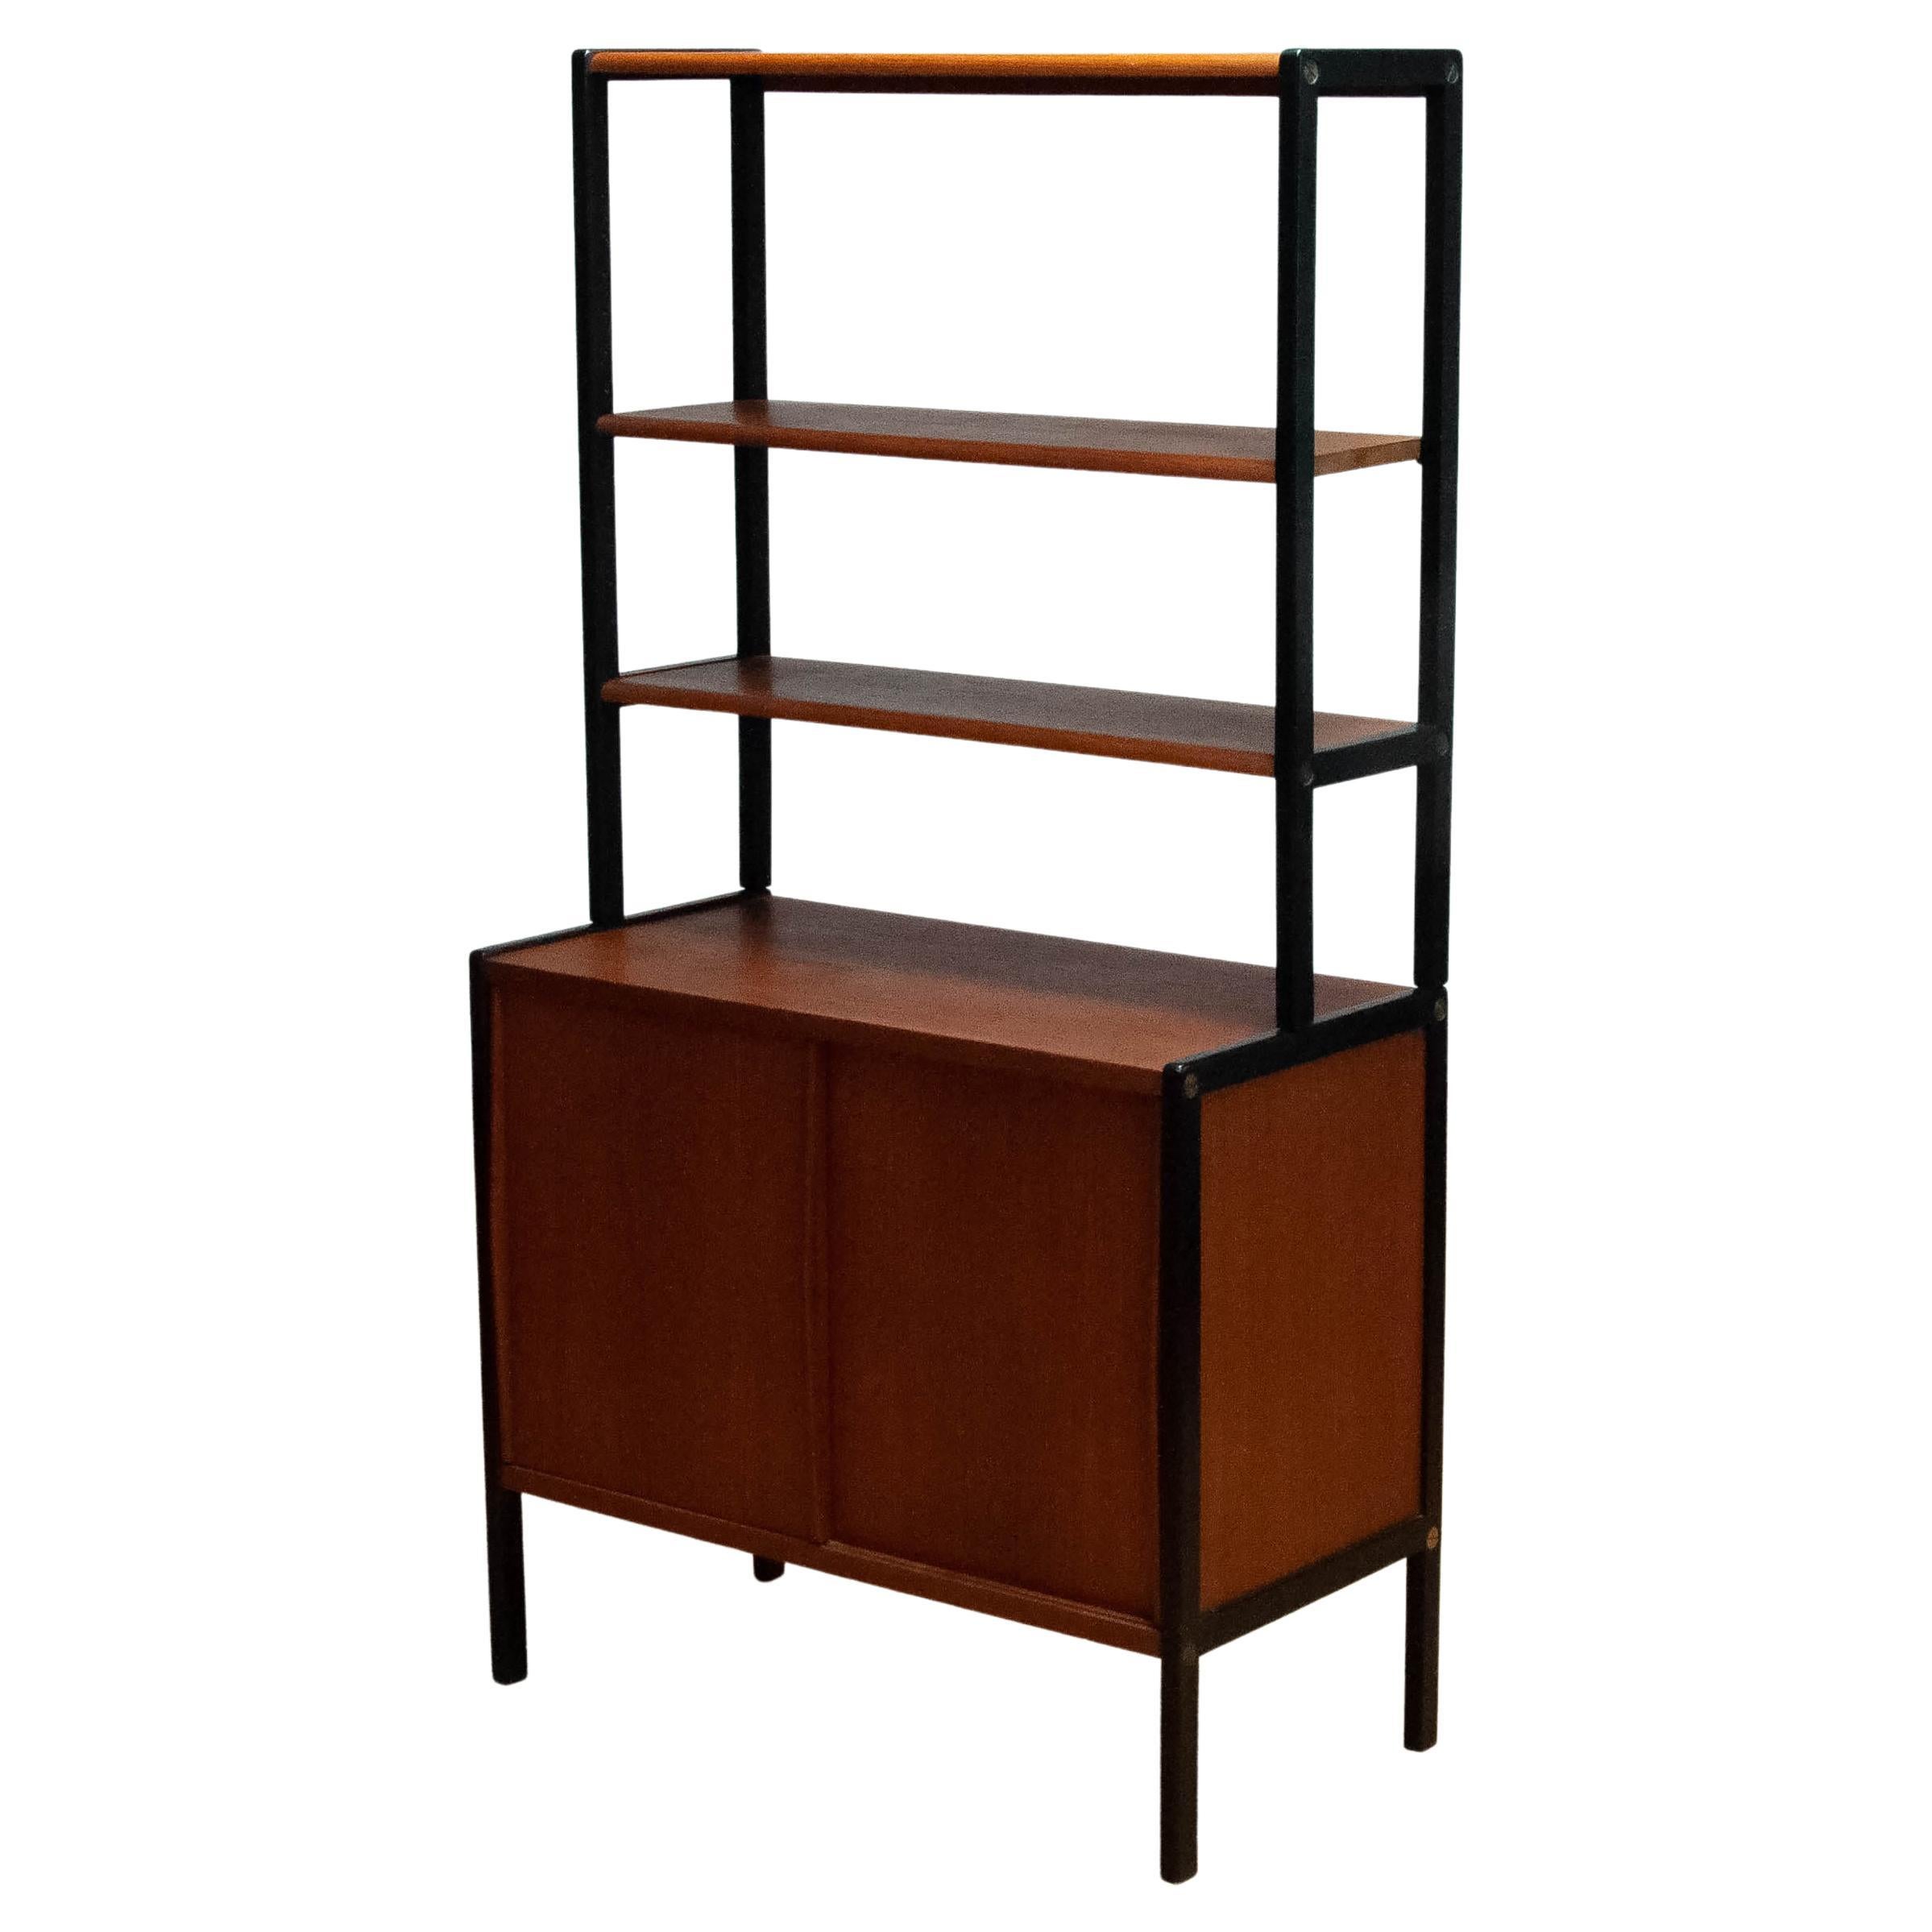 Beautiful Scandinavian Moderen bookcase designed by Bertil Fridhagen for Bodafors in Sweden 1960s.
The lower cabinet has two sliding doors and inside a shelf. Fixed positioned.
On top is a rack with three teak shelfs. The shelf in the middle is